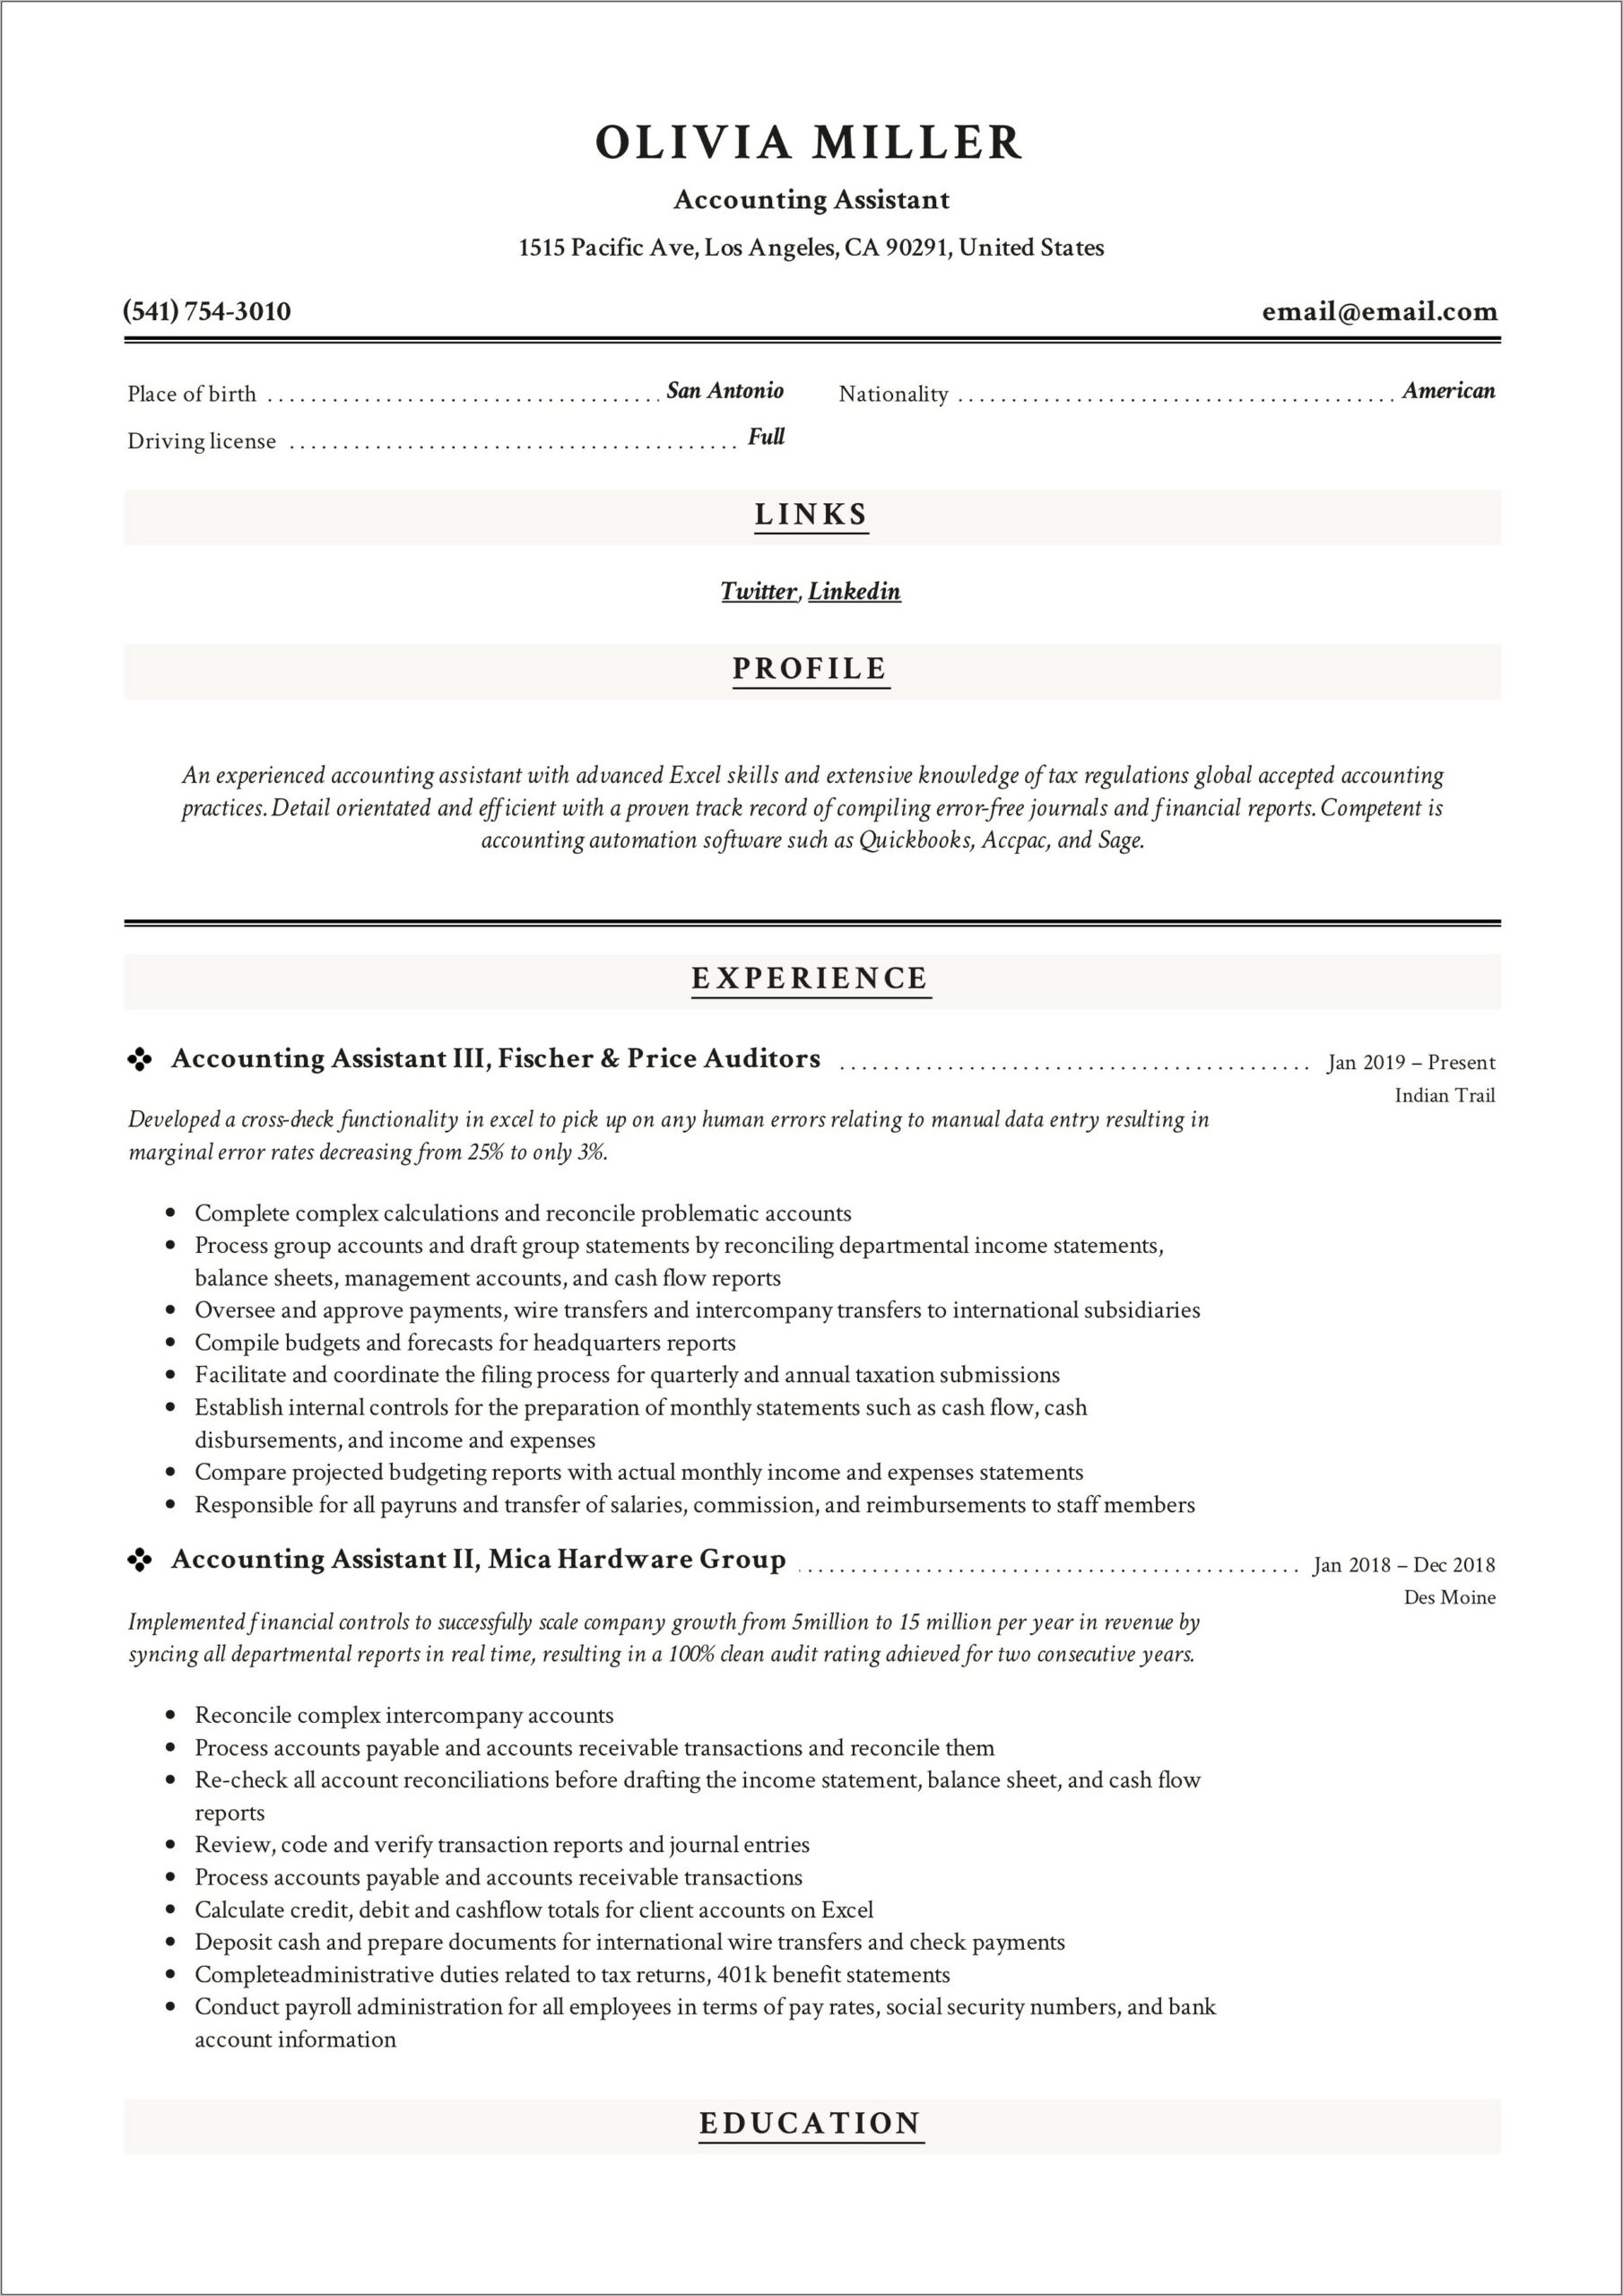 Resume Excell A Skill To Use